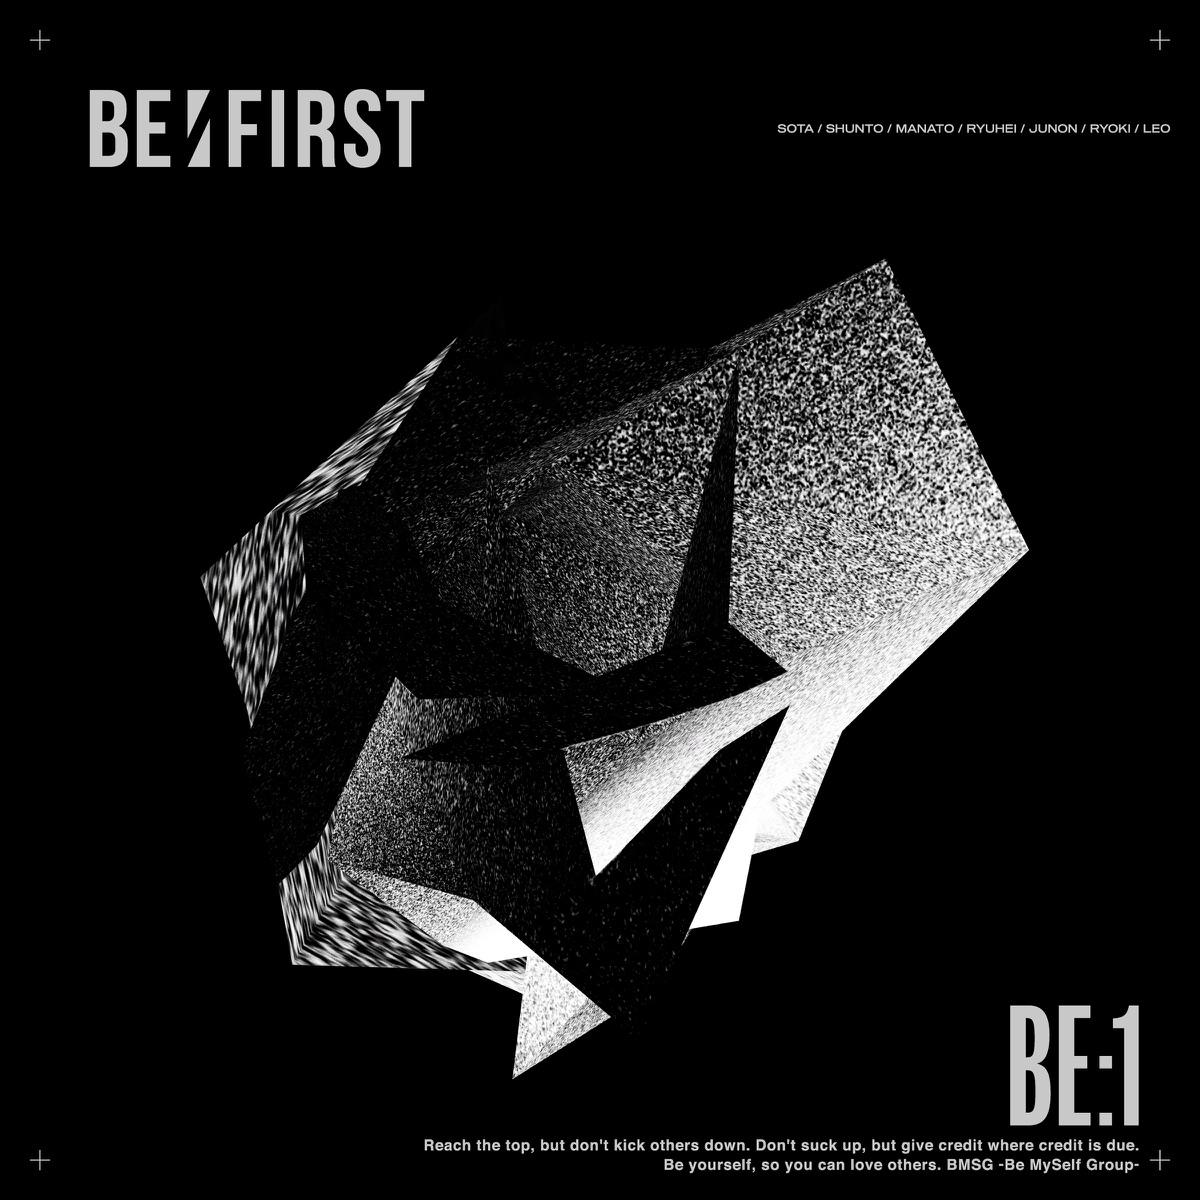 『BE:FIRST - Move On 歌詞』収録の『BE:1』ジャケット